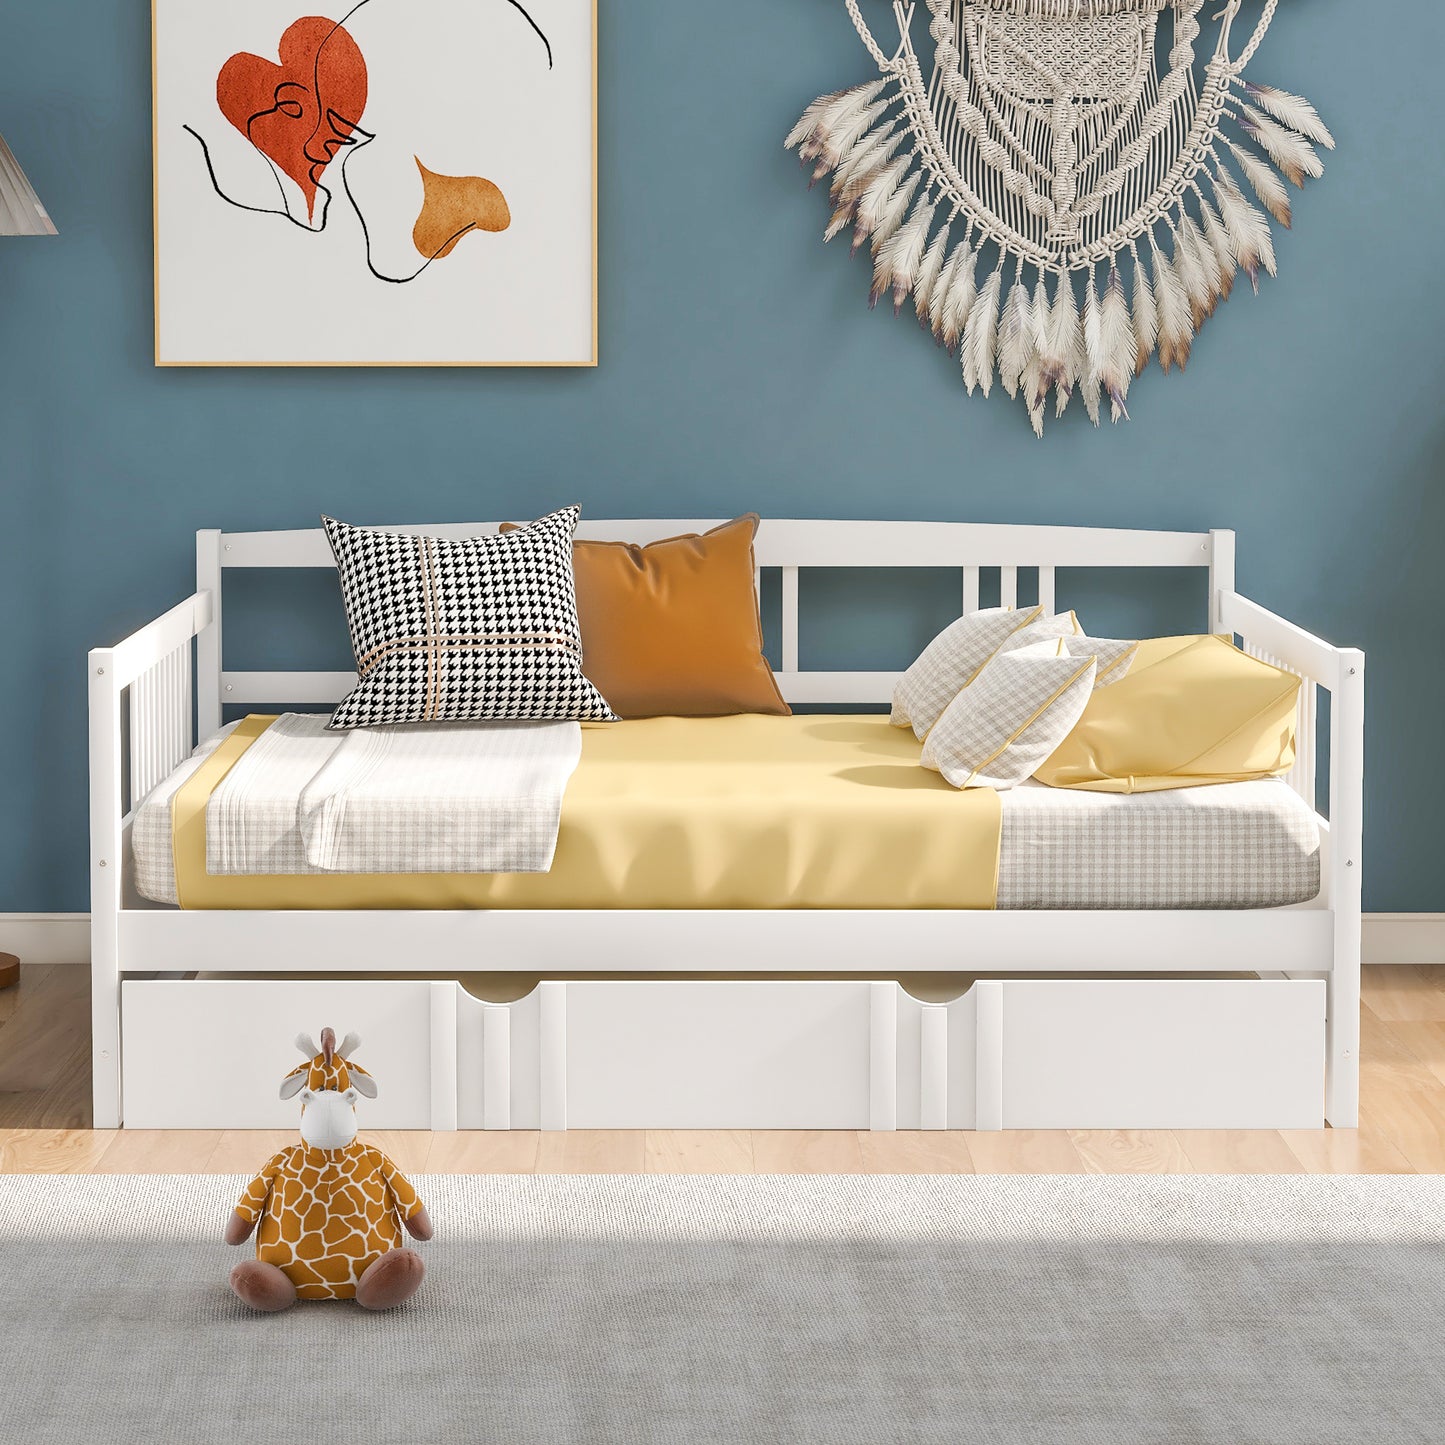 Full Size Daybed Wood Bed with Twin Size Trundle,White